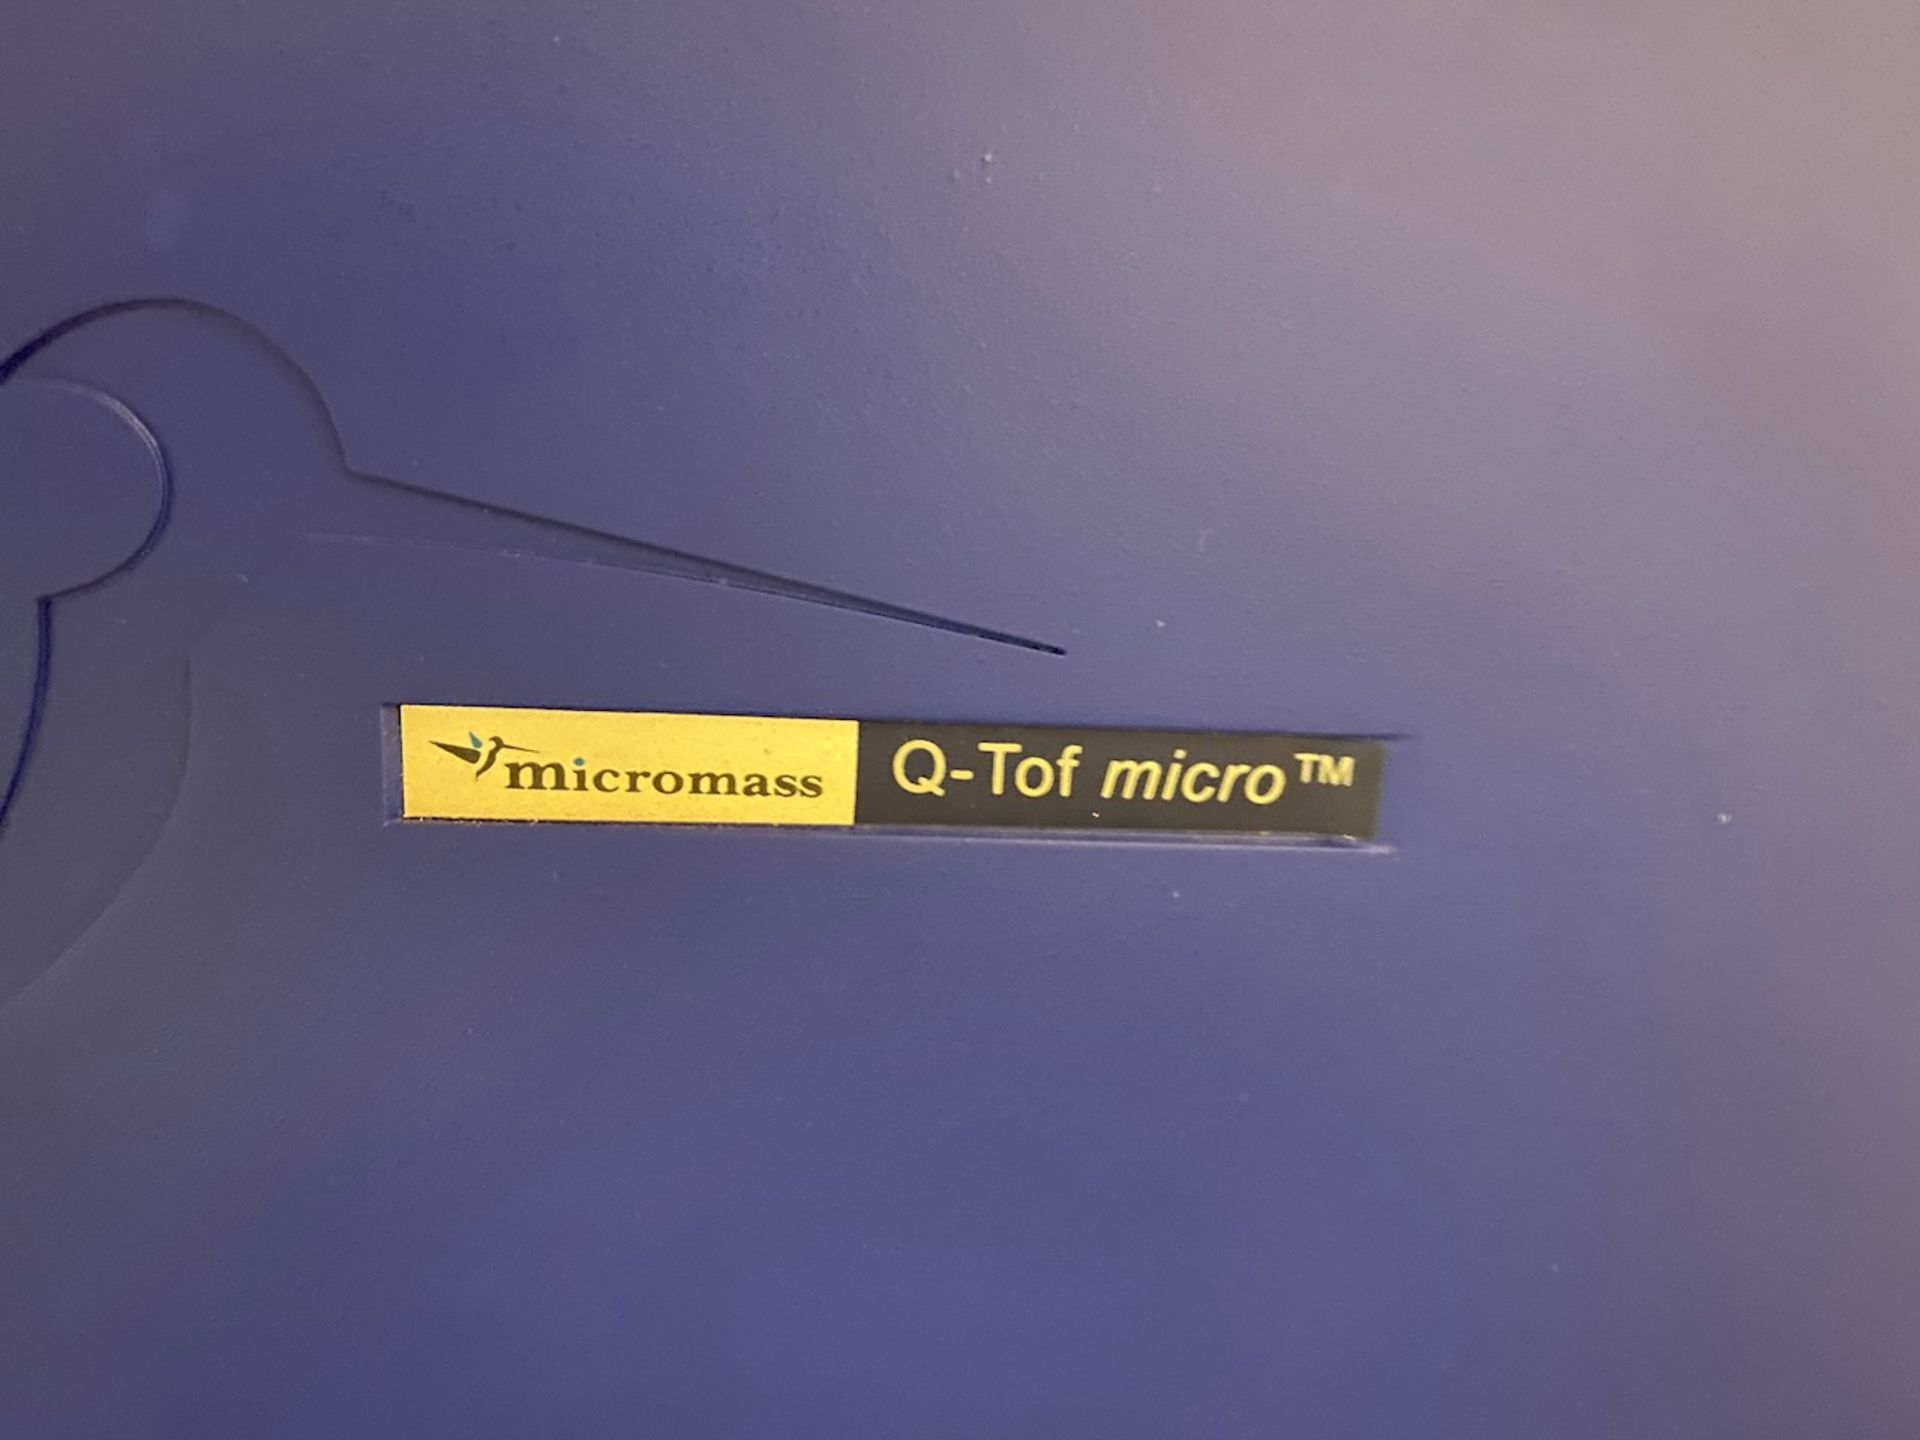 Micromass Q-tof Micro mass spectrometer with Micromass 3889 detector and Edwards E2M28 vacuum - Image 13 of 13